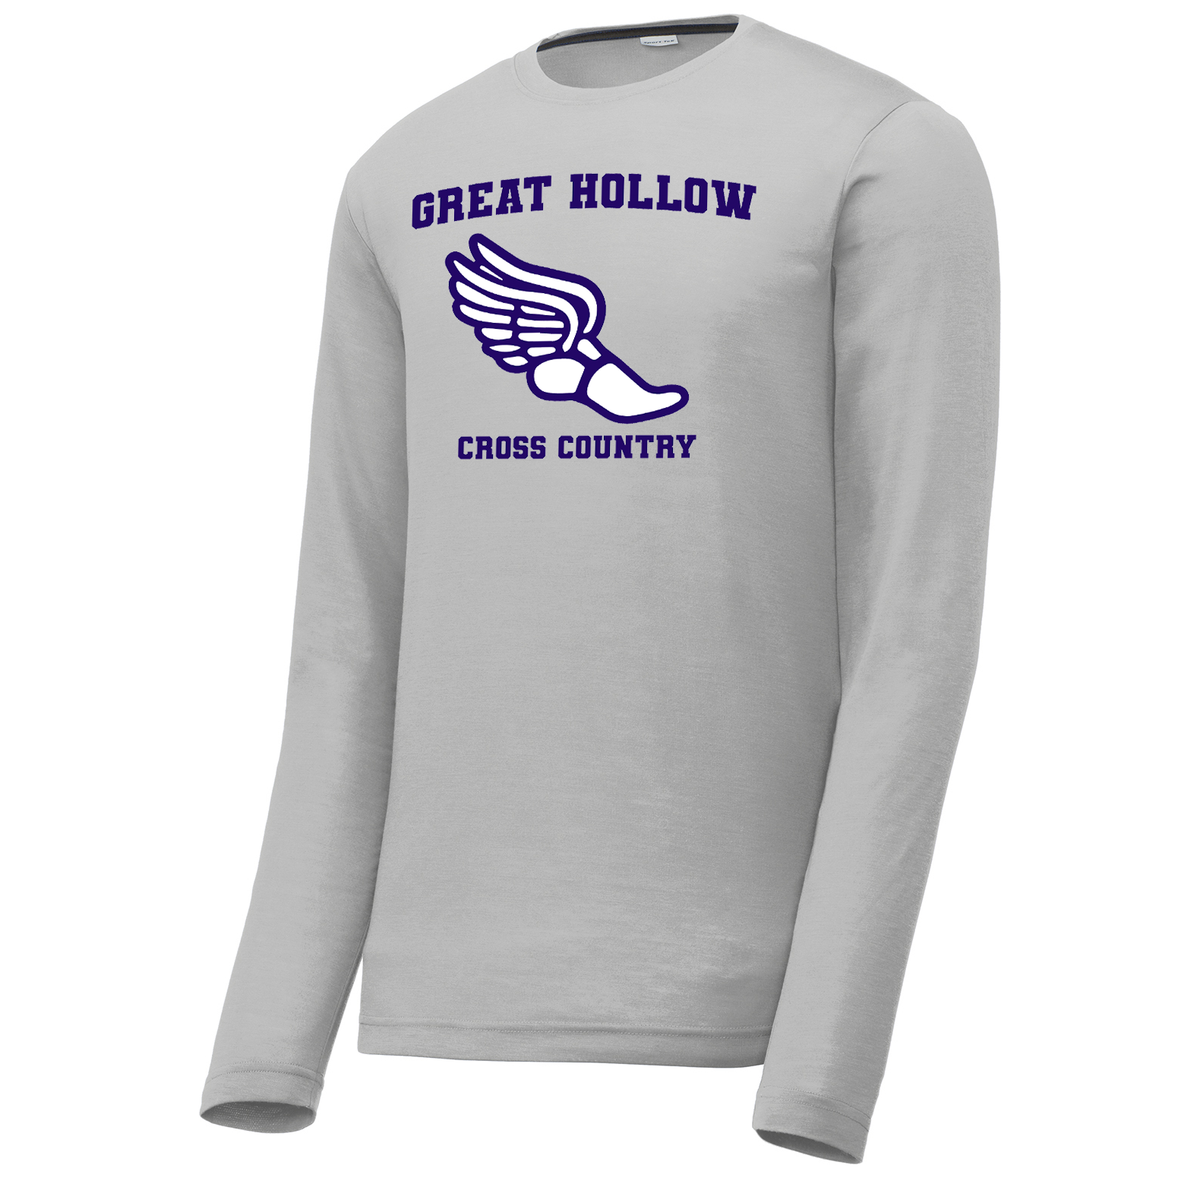 Great Hollow Cross Country Long Sleeve CottonTouch Performance Shirt